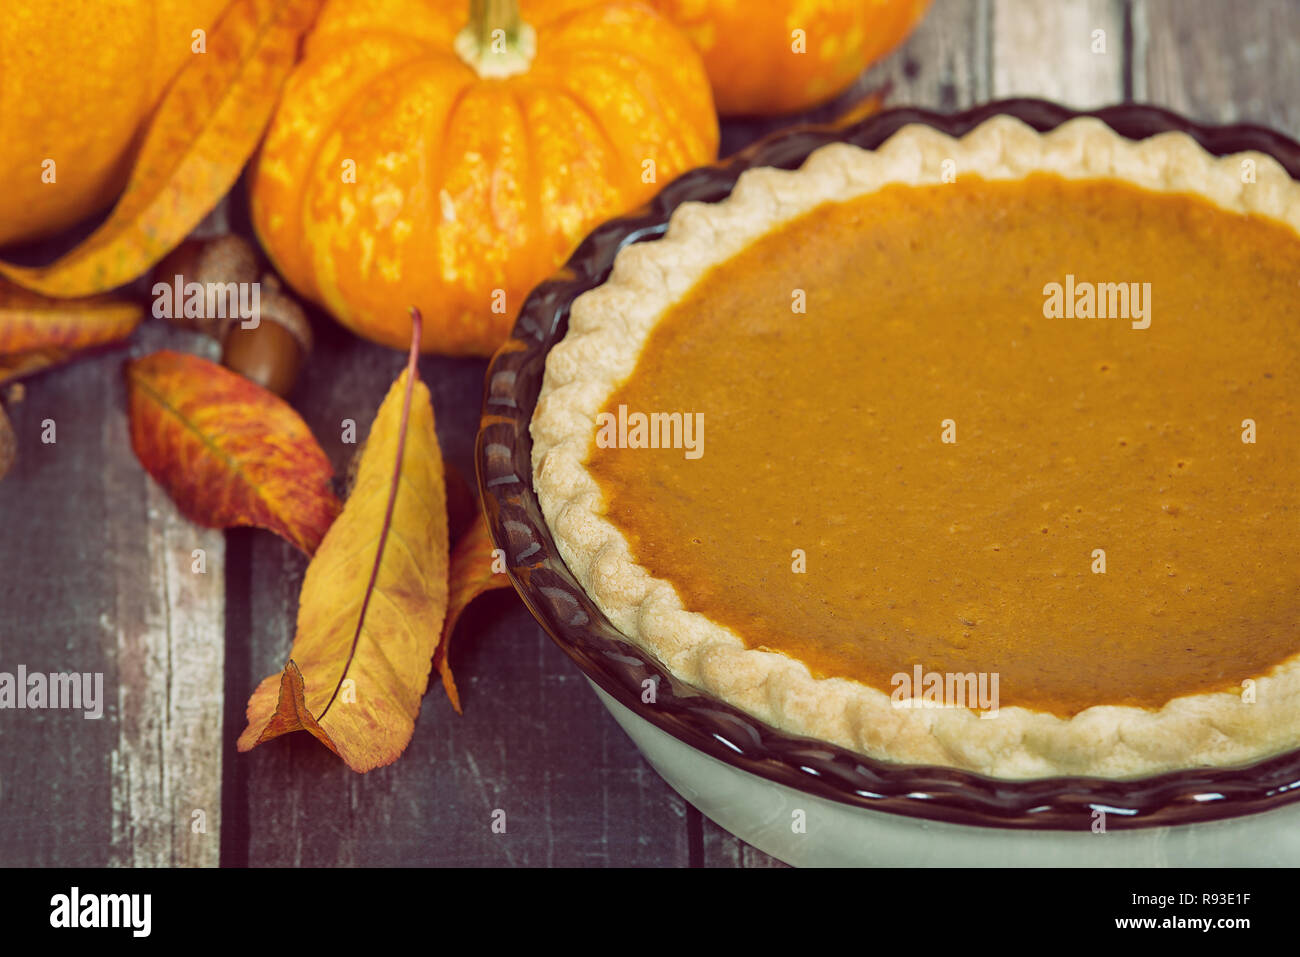 Pumpkin pie with pumpkins, golden autumn leaves, and acorns, on rustic table. Stock Photo